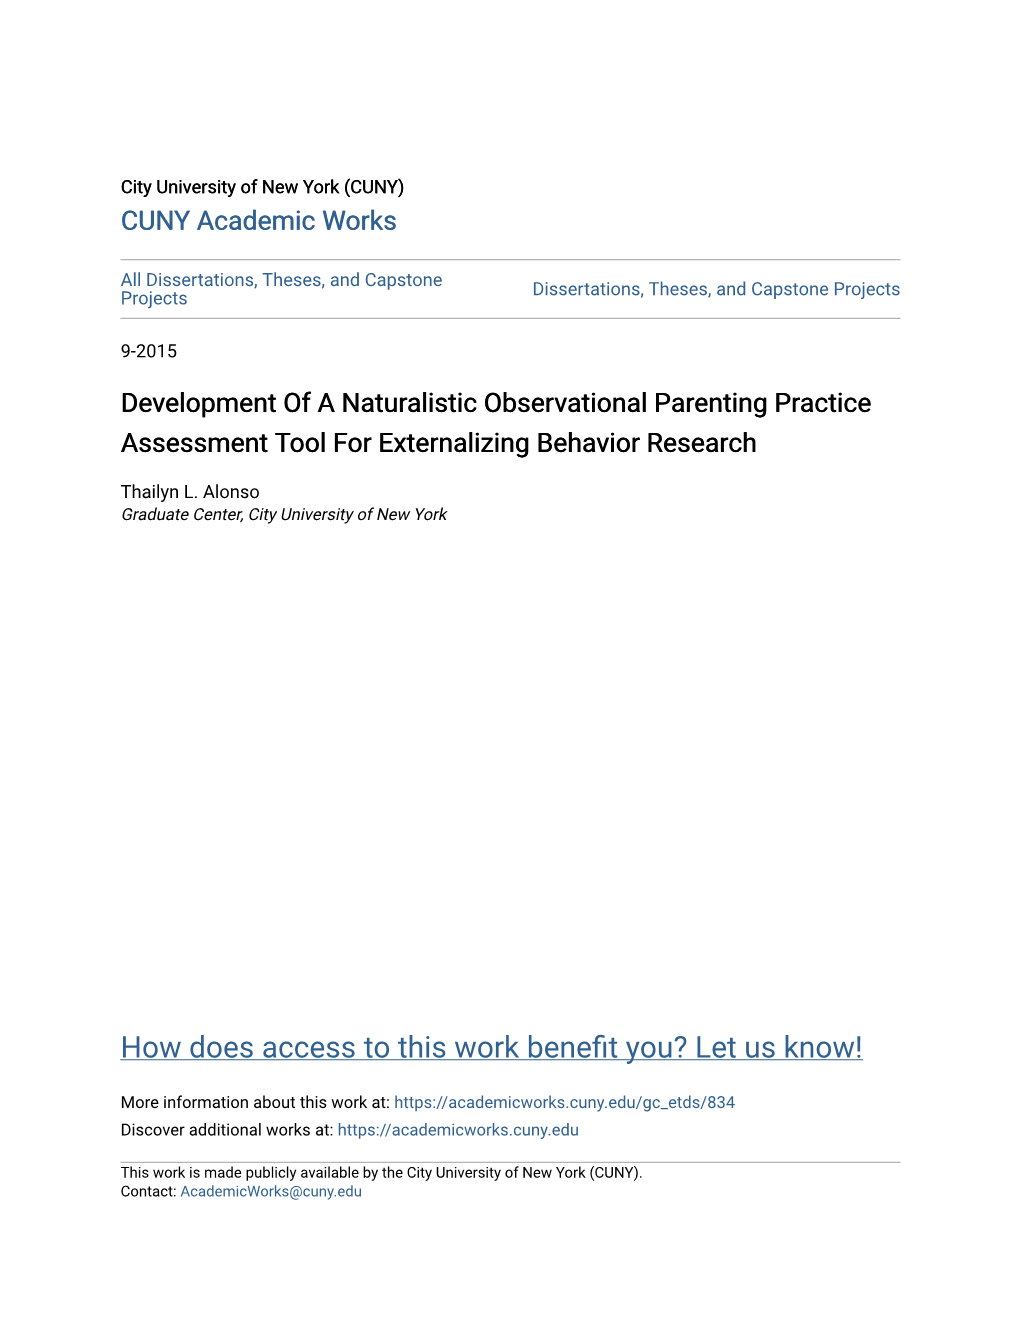 Development of a Naturalistic Observational Parenting Practice Assessment Tool for Externalizing Behavior Research